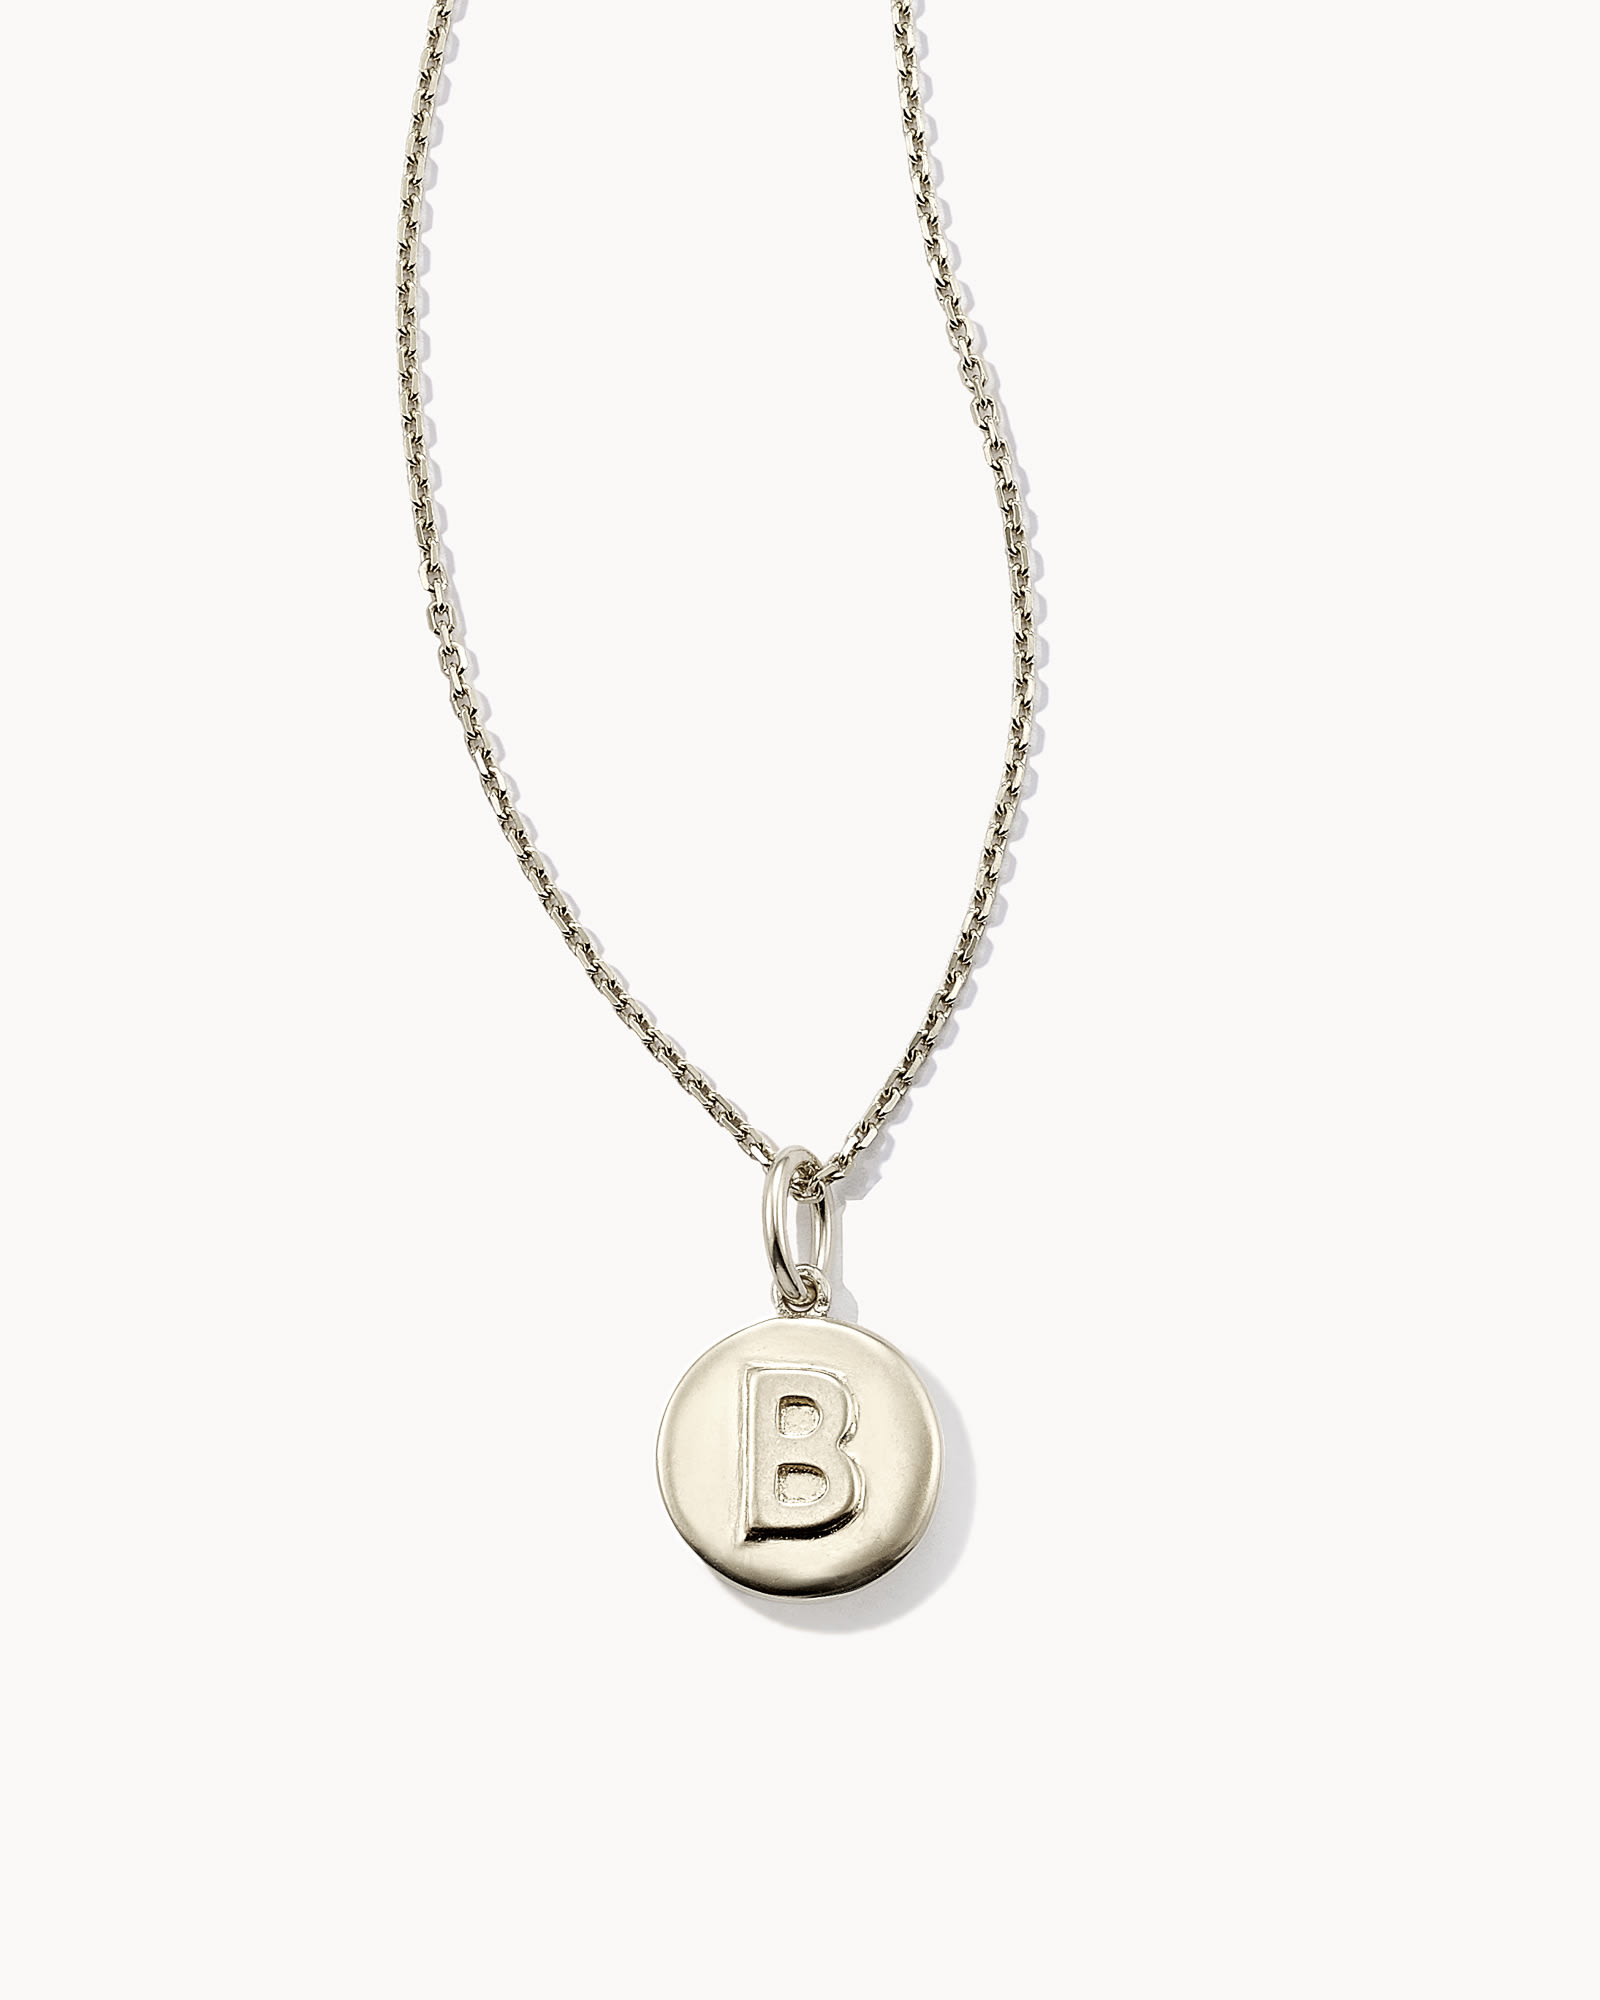 Kendra Scott Letter B Coin Pendant Necklace in Oxidized Sterling Silver   Metal